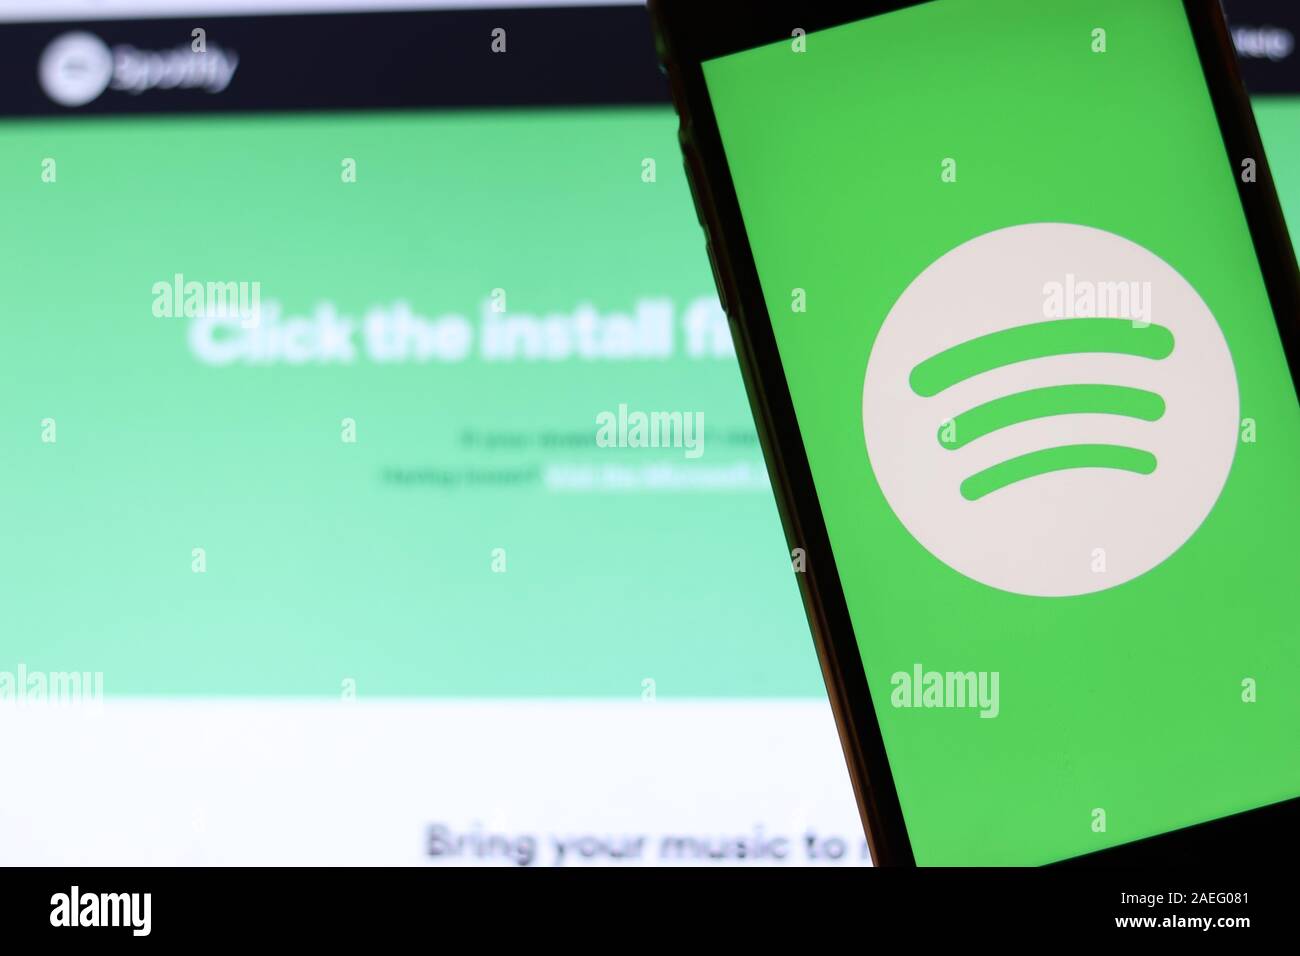 Los Angeles, California, USA - 21 November 2019: Spotify logo on phone screen with icon on laptop on blurry background, Illustrative Editorial. Stock Photo